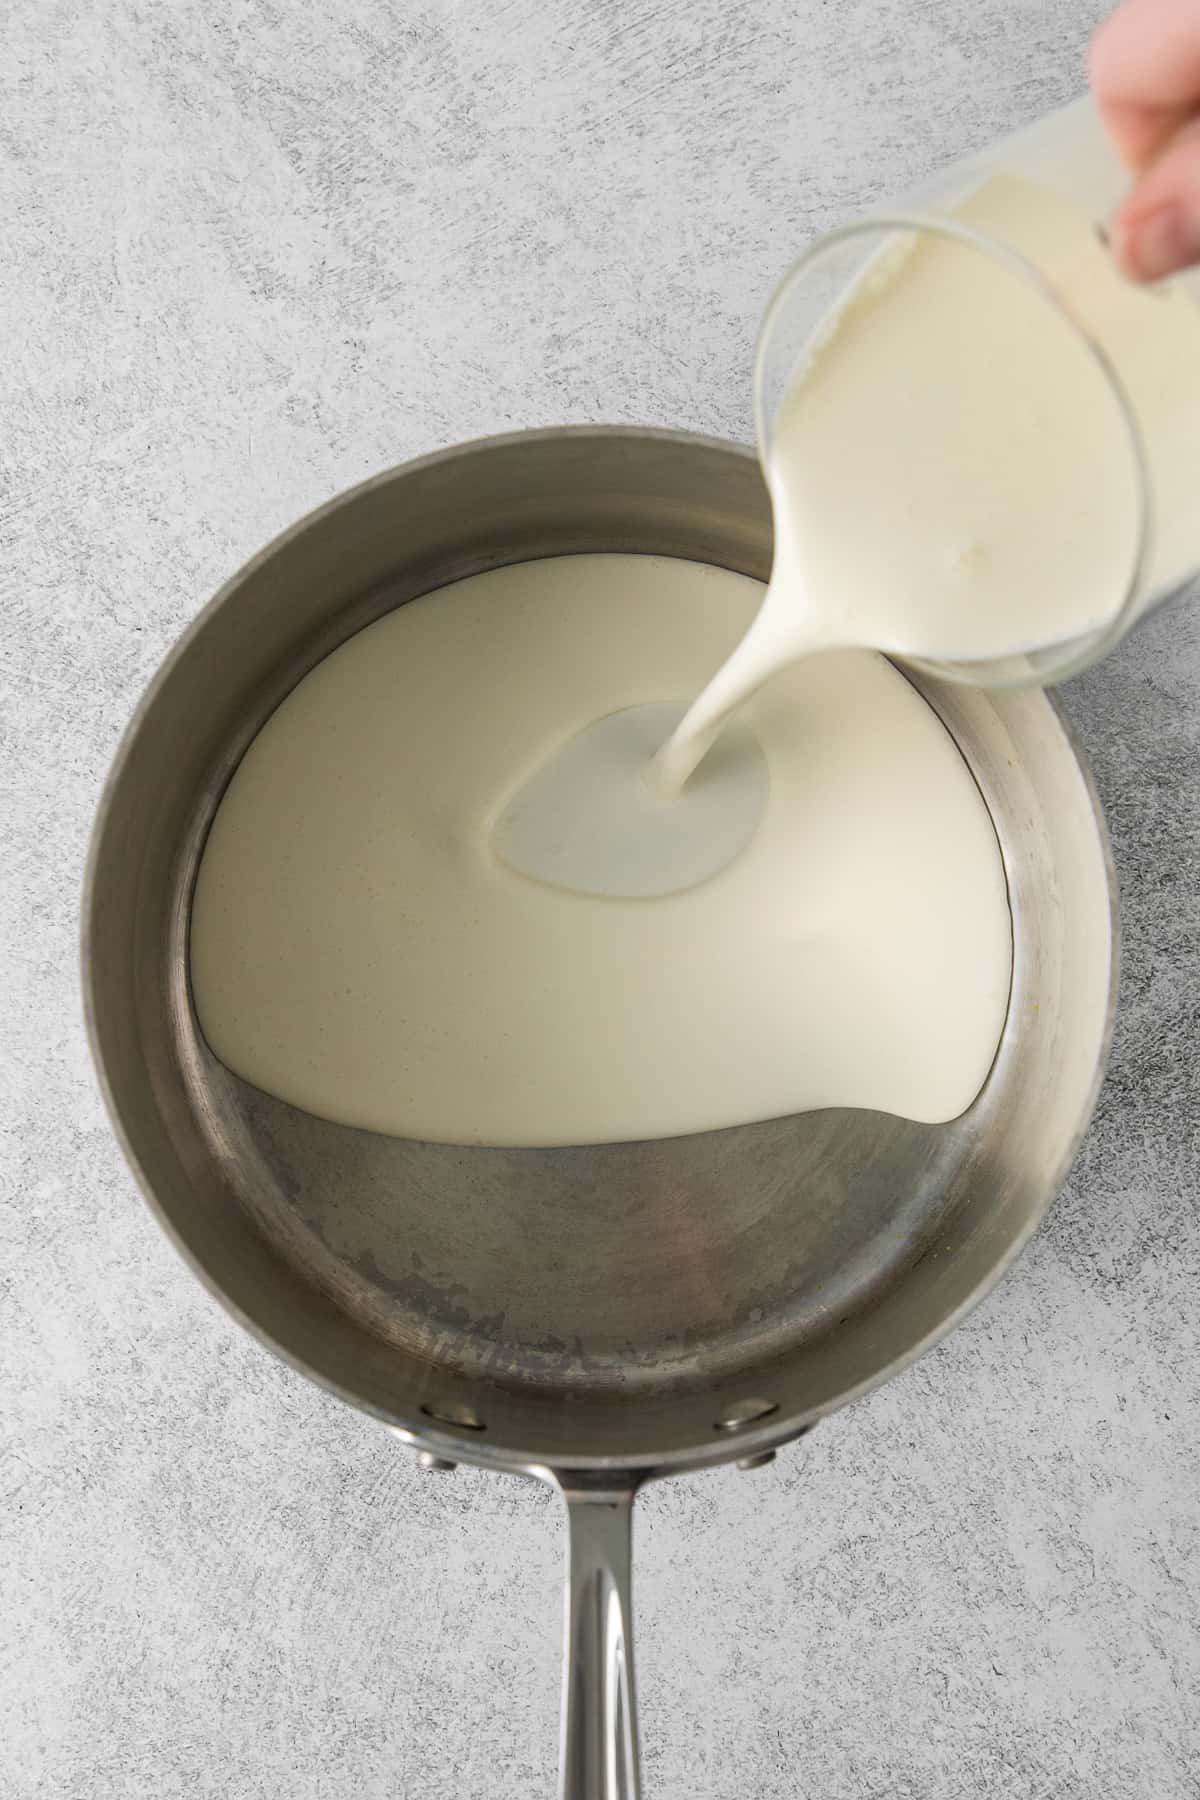 Heavy cream being poured in a saucepan.